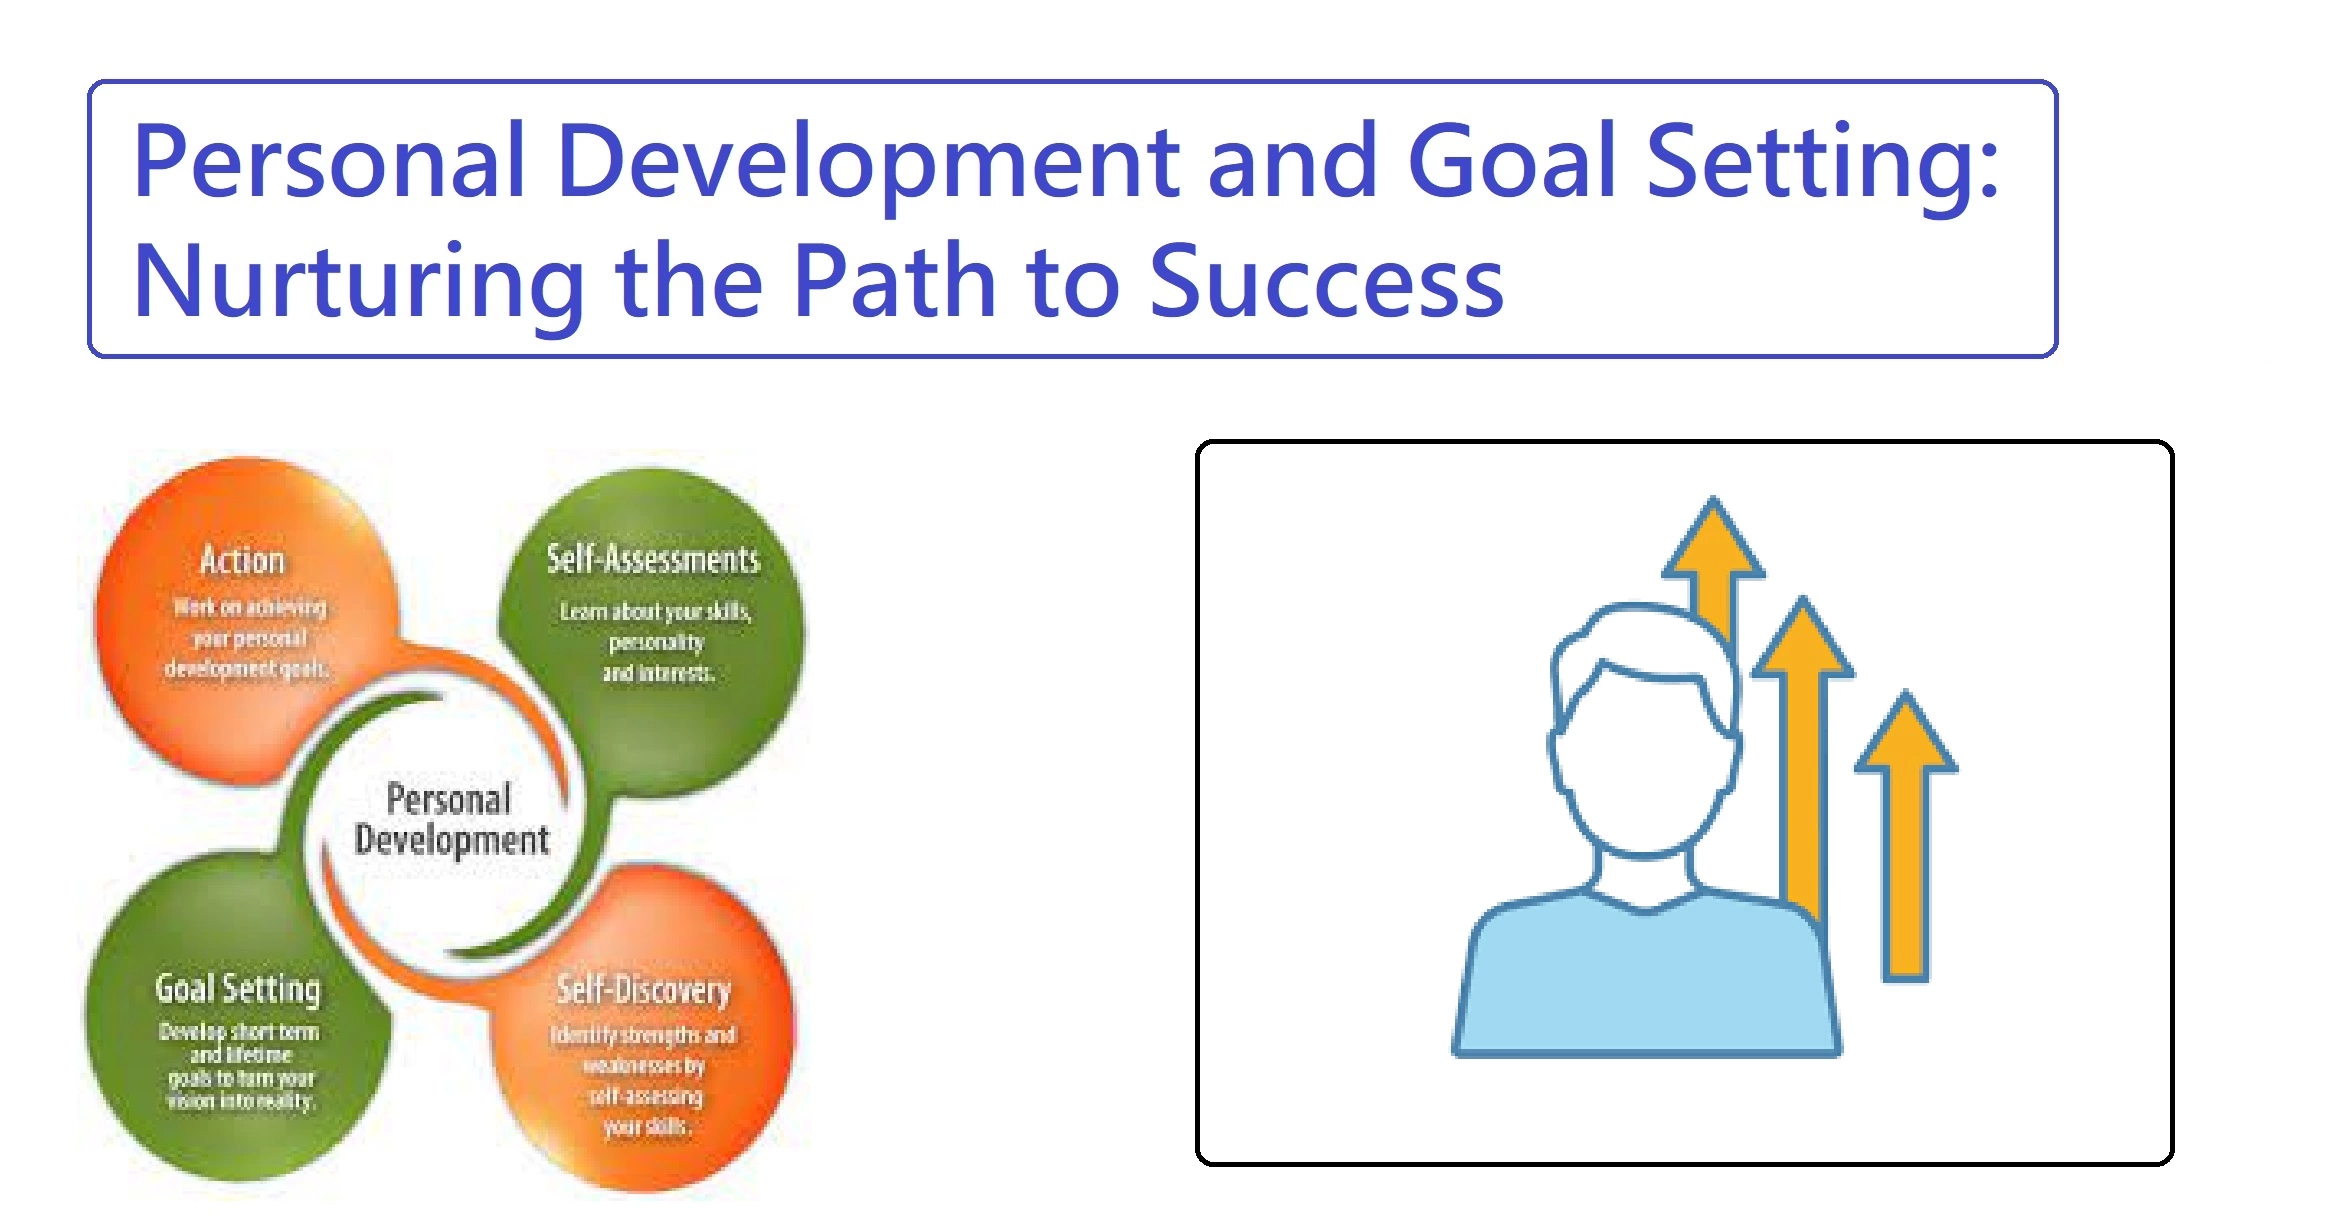 Personal Development and Goal Setting: Nurturing the Path to Success